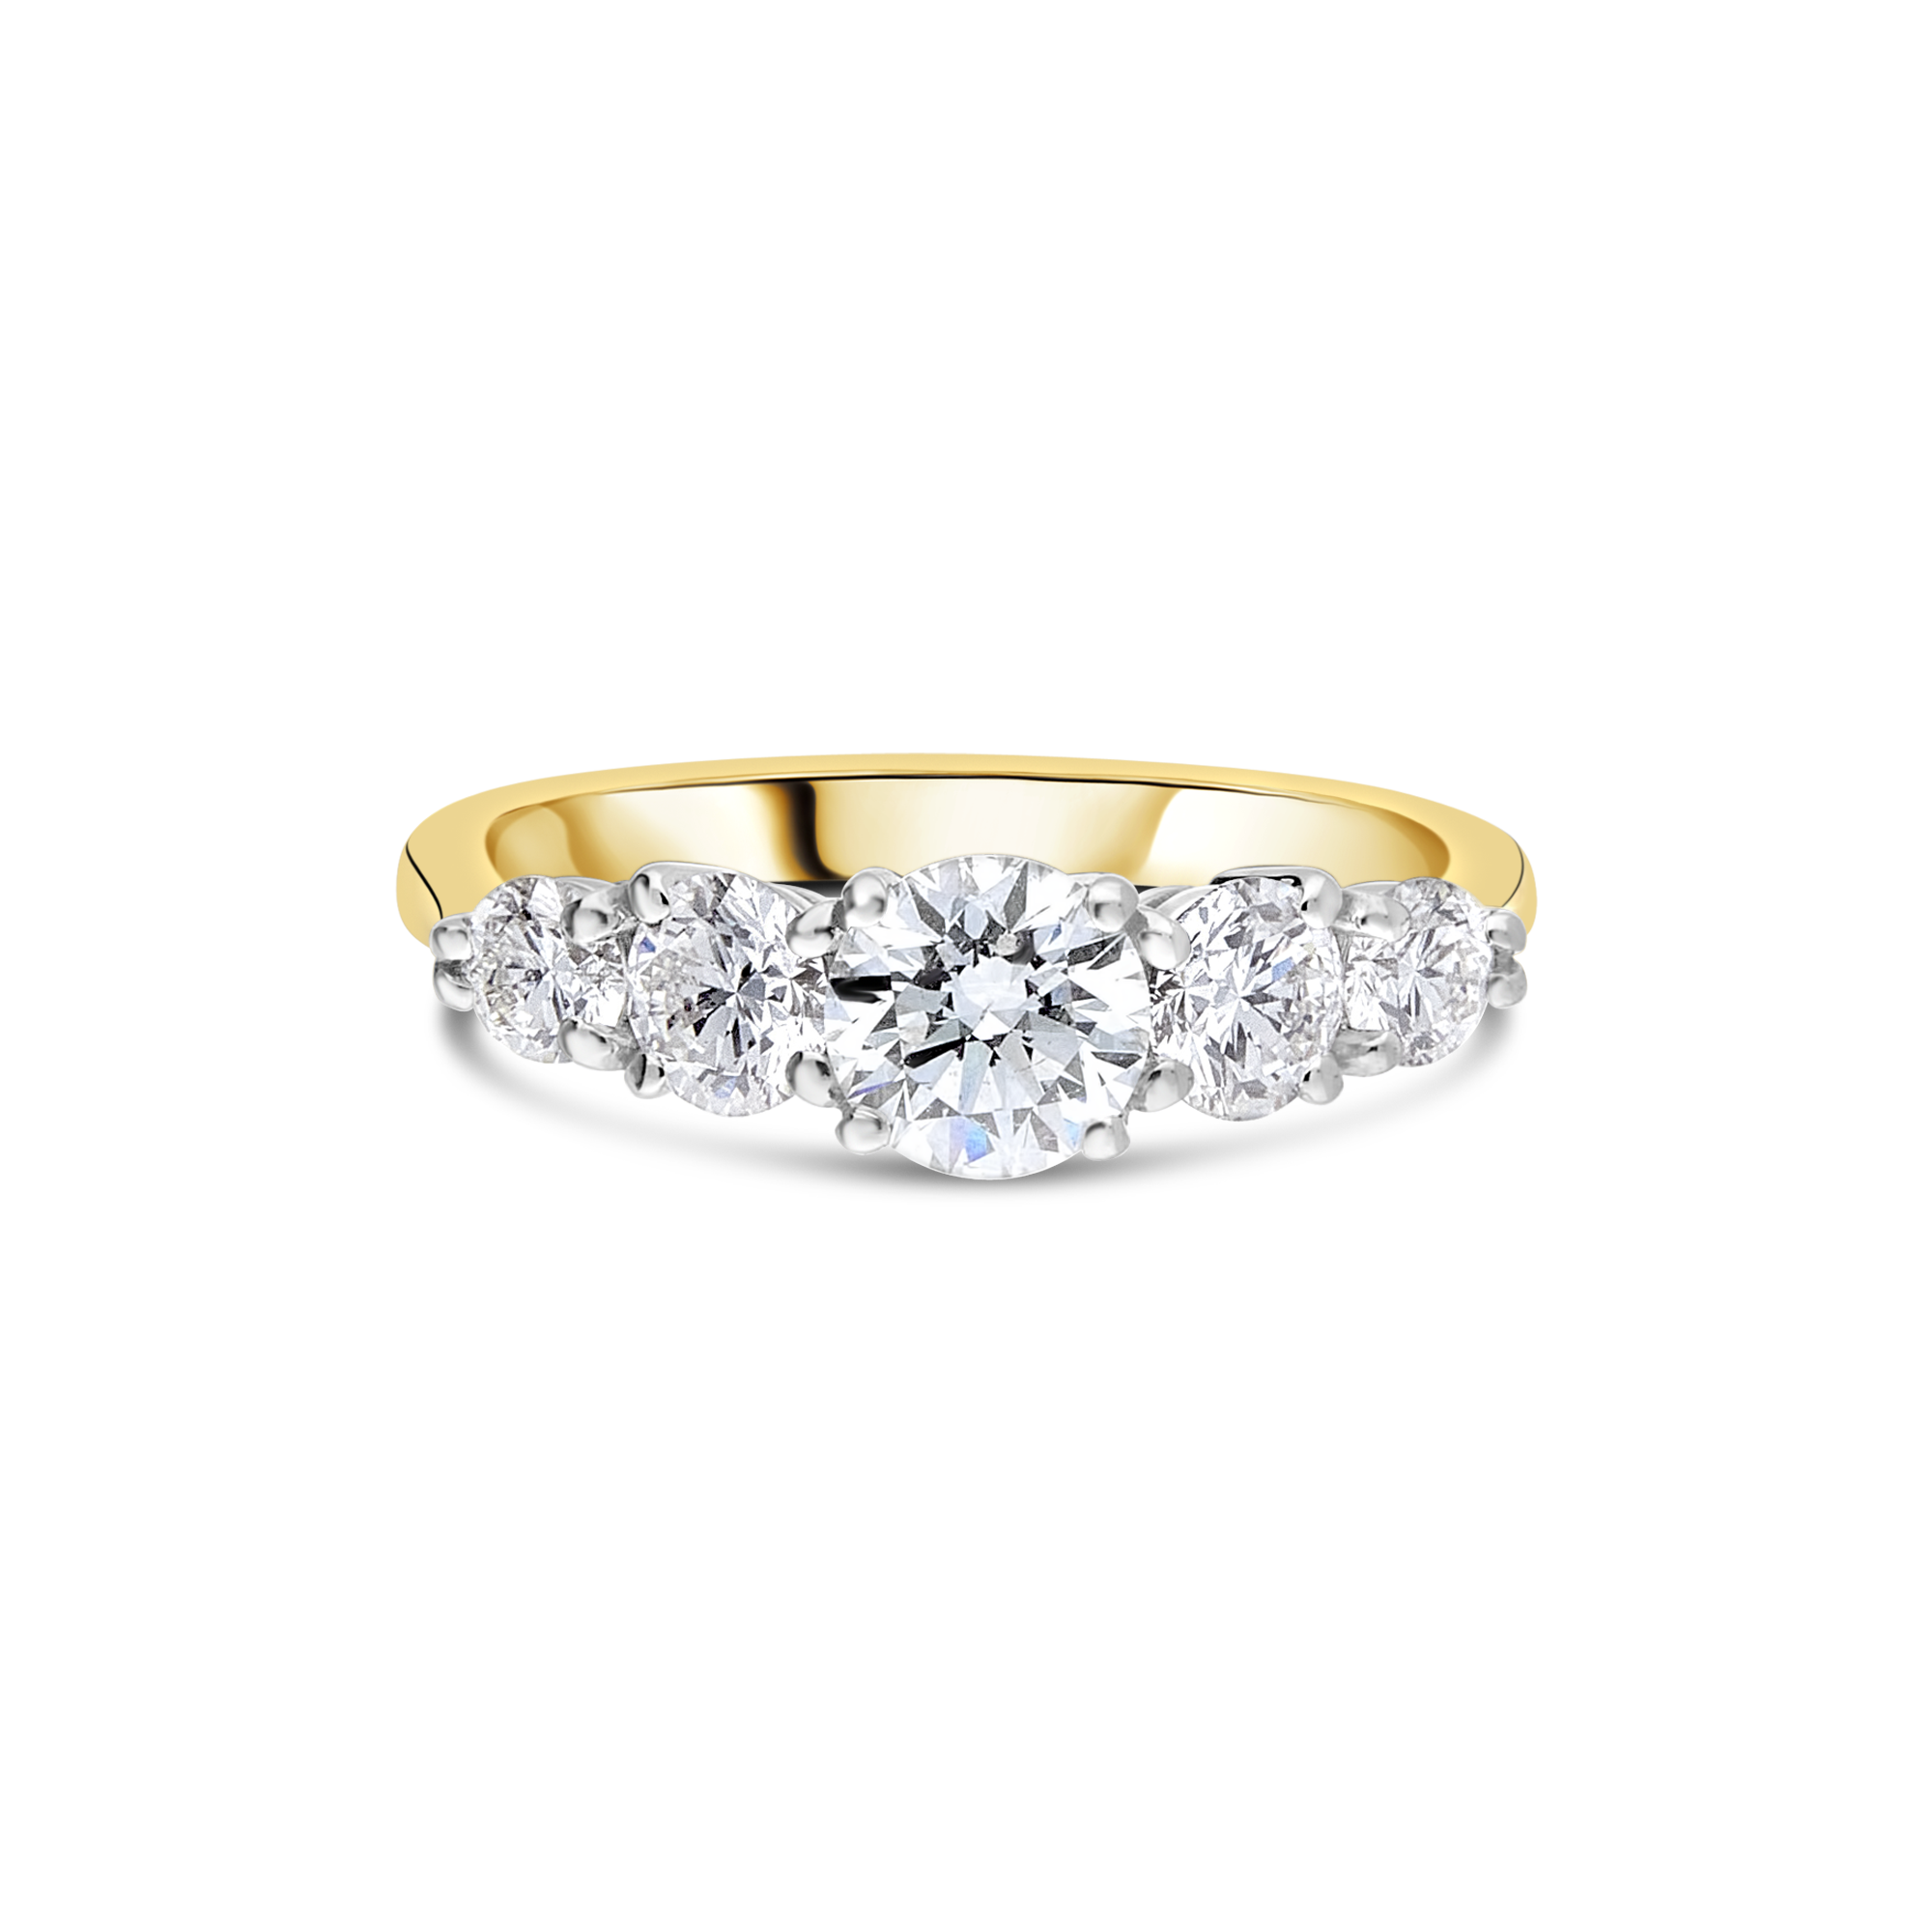 The "Decor" Five Stone Ring, Yellow Gold